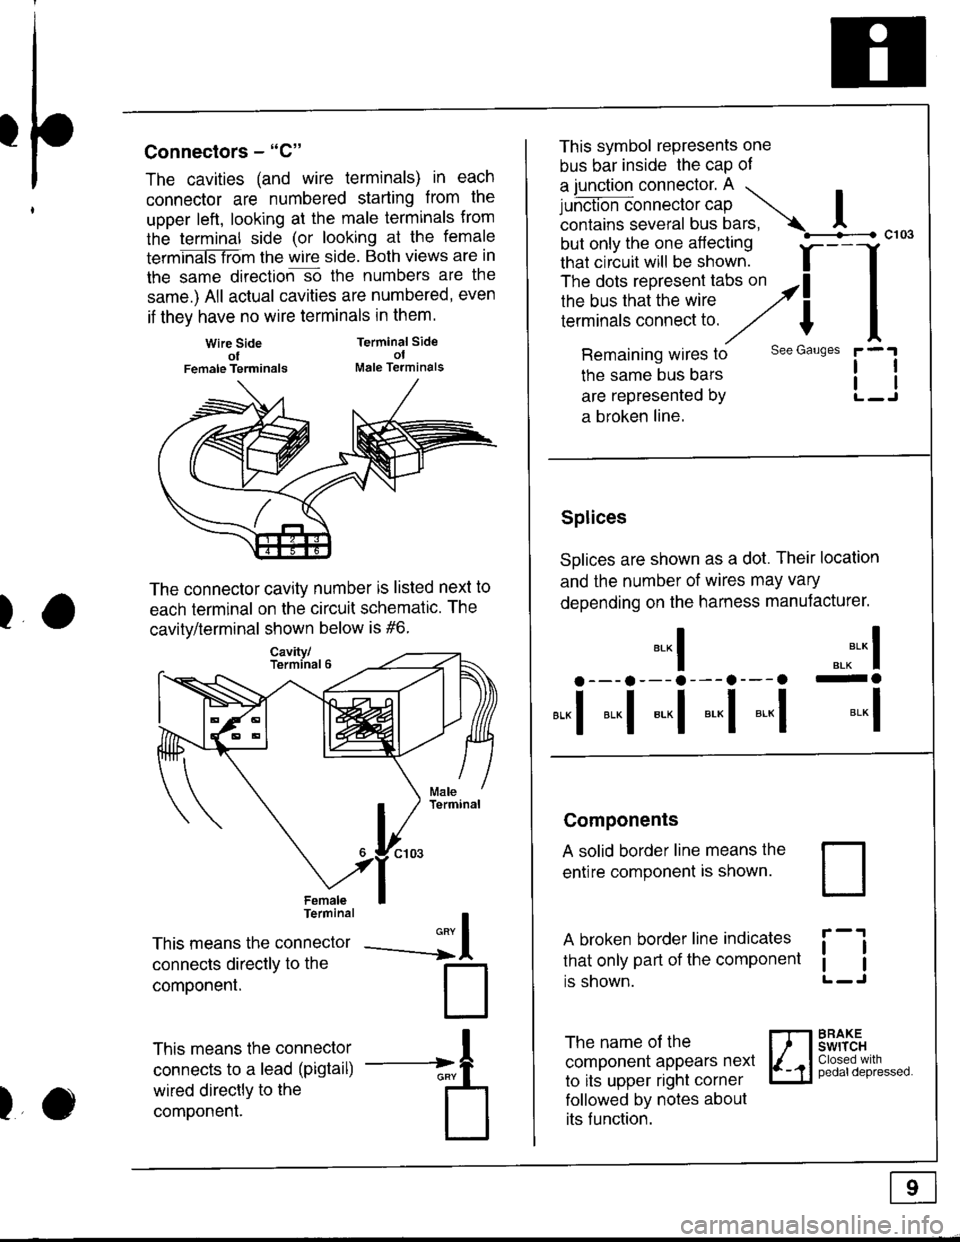 HONDA INTEGRA 1998 4.G Workshop Manual I
I
)
Connectors - "C"
The cavities (and wire terminals) in each
connector are numbered starting from the
upper left, looking at the male termlnals from
the terminal side (or looking at the female
ter